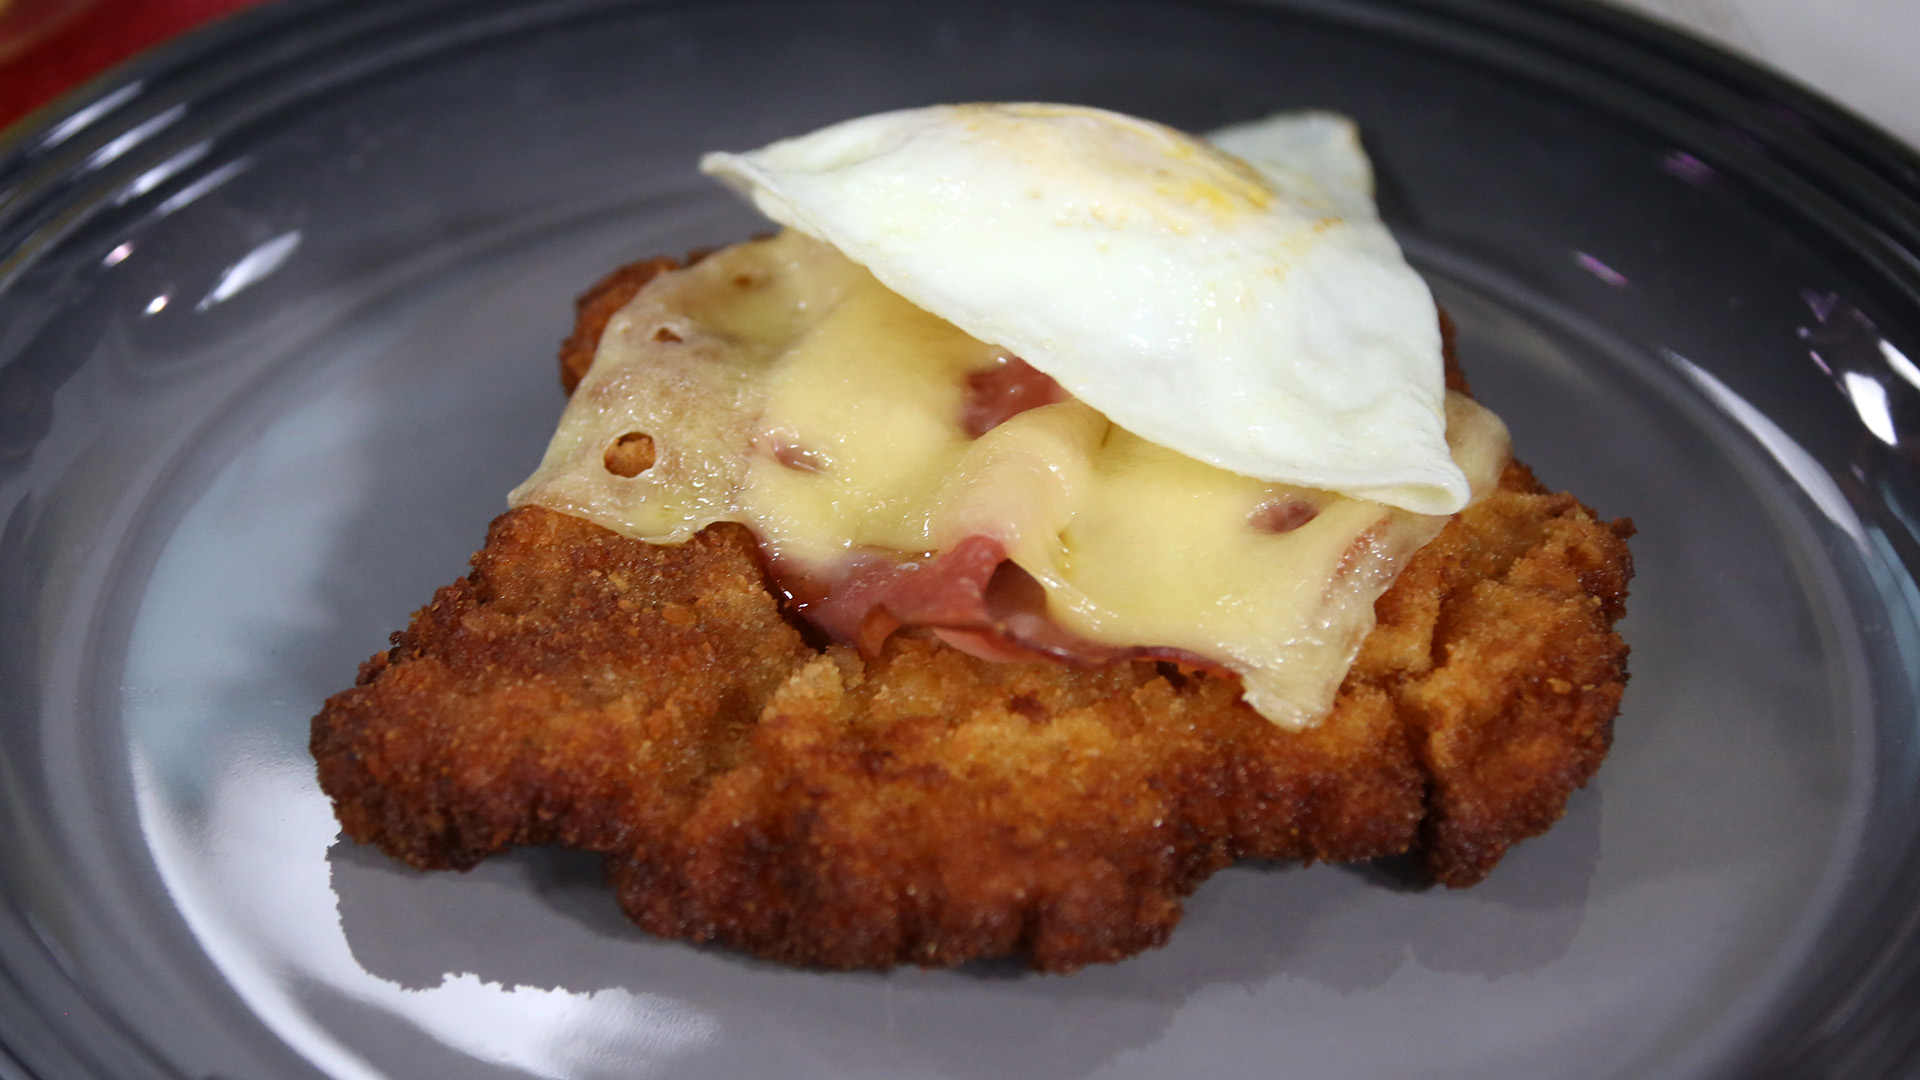 Cheese and egg topped pork schnitzel